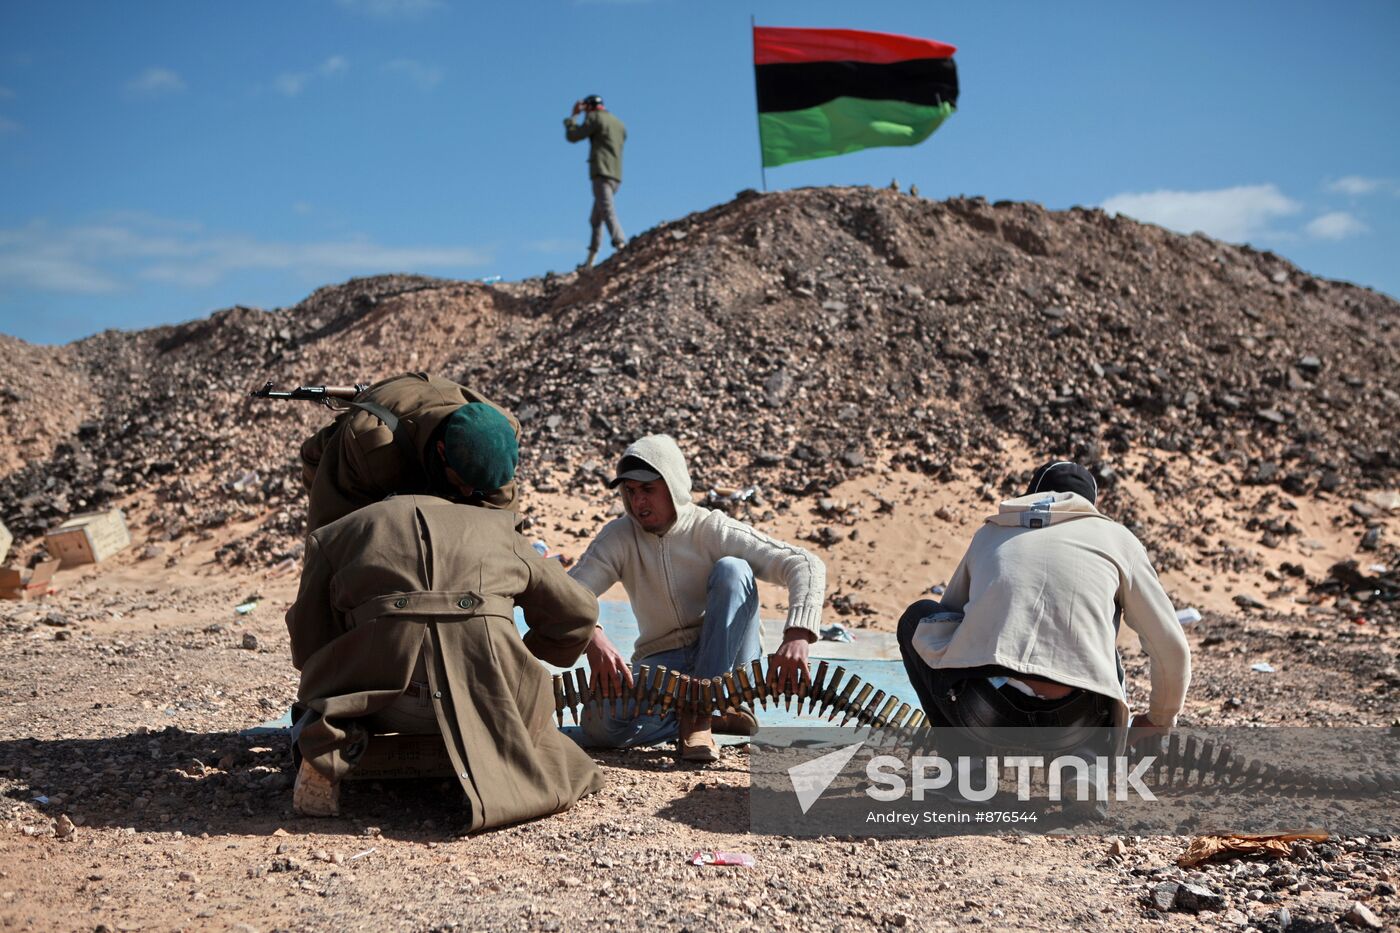 Situation in Libya